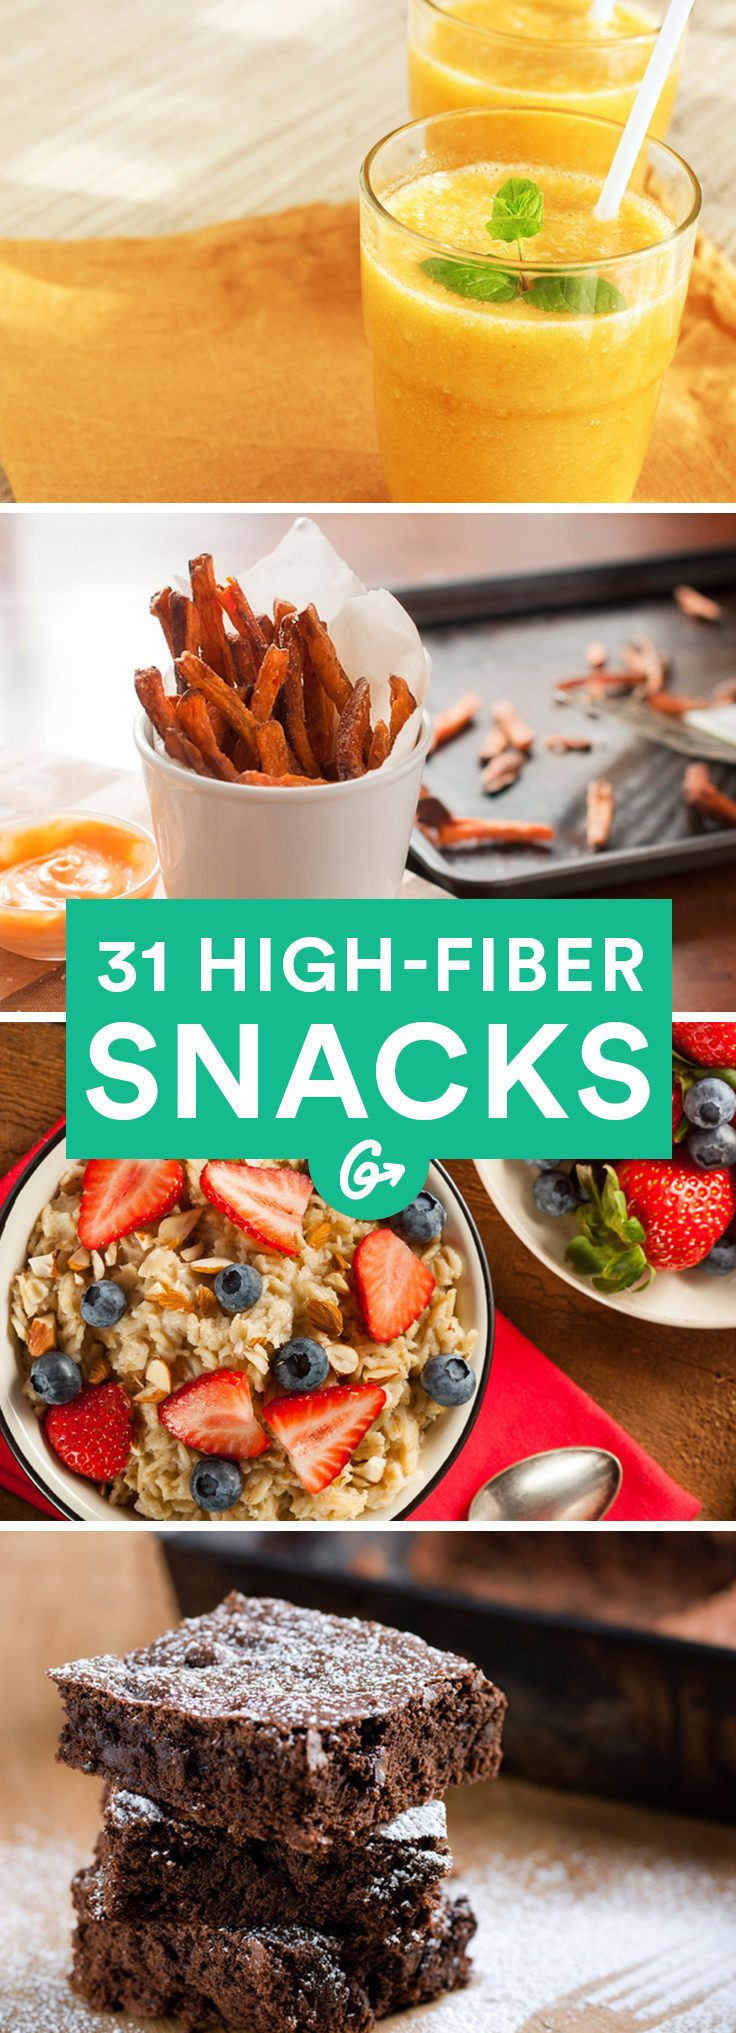 High Fiber Crackers
 1000 images about Health on Pinterest